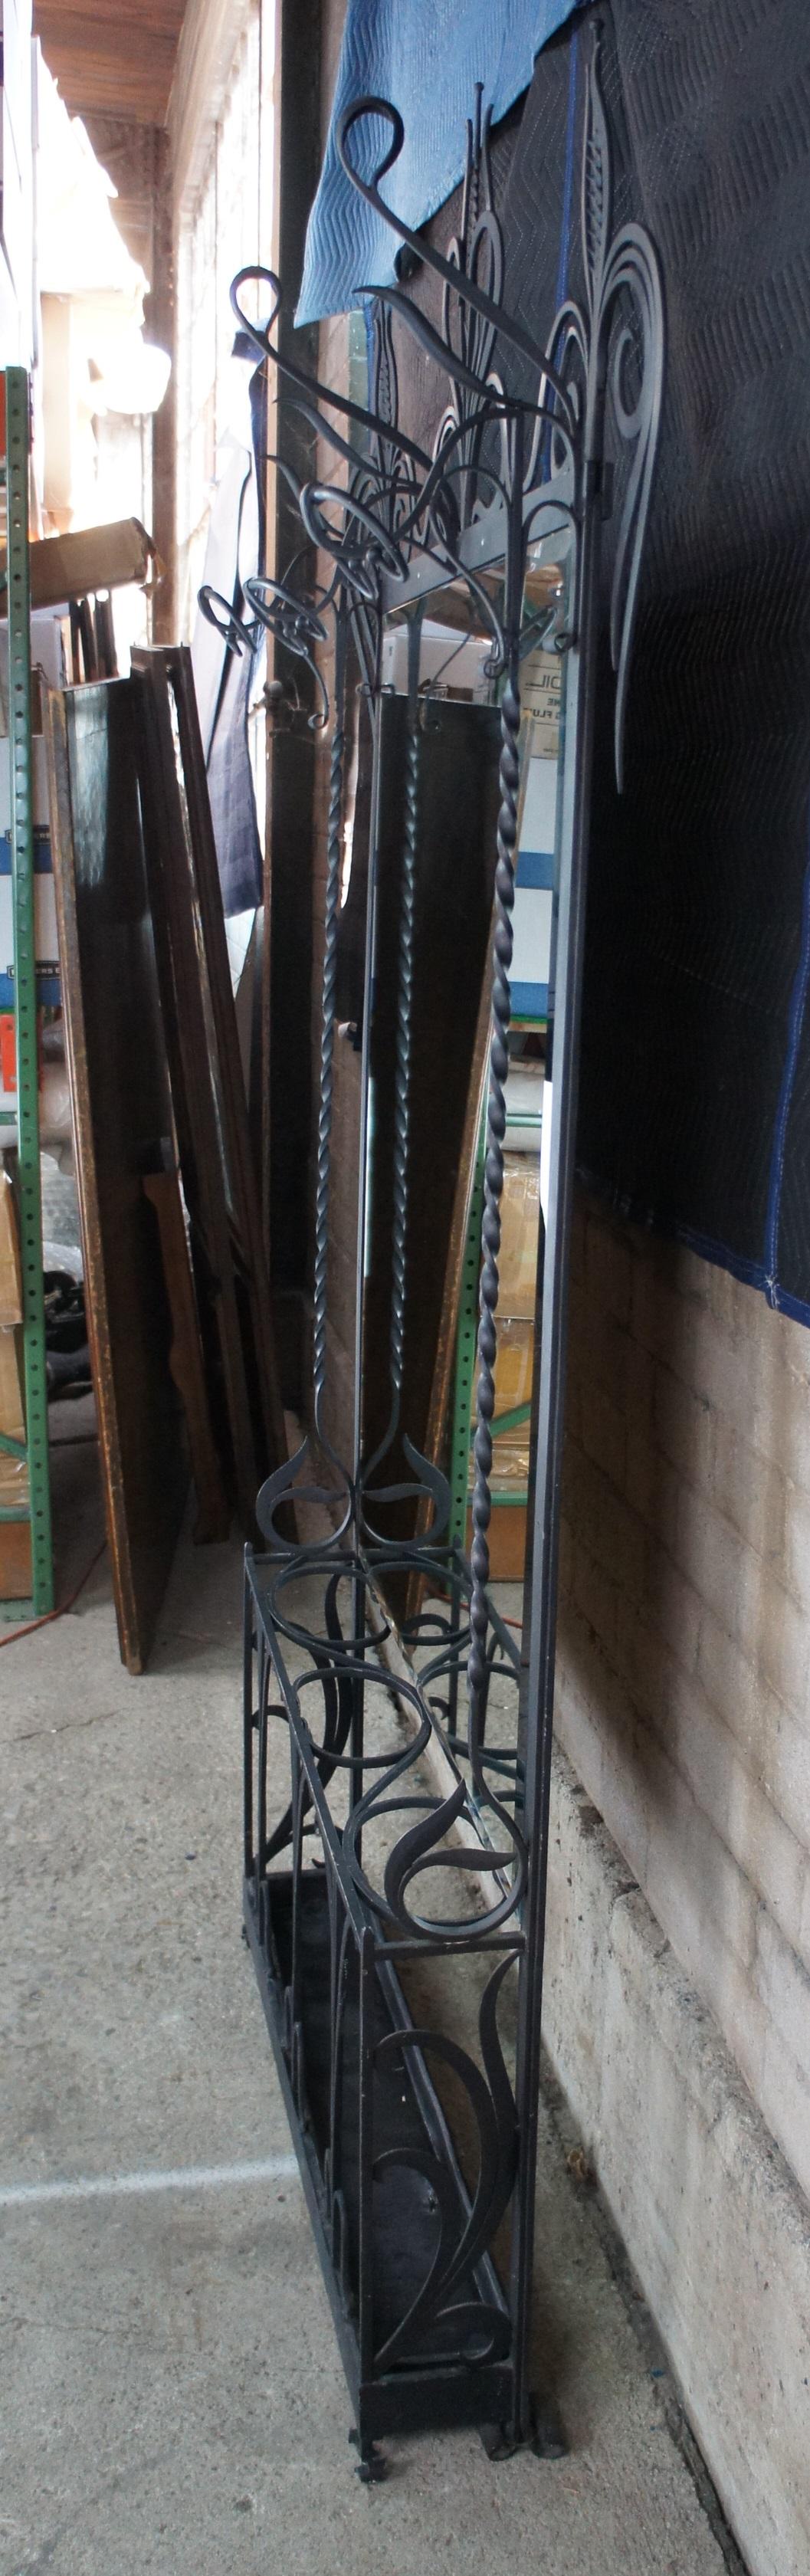 Antique French Wrought Iron Mirror Hall Tree Coat Hat Rack Umbrella Cane Stand In Good Condition For Sale In Dayton, OH